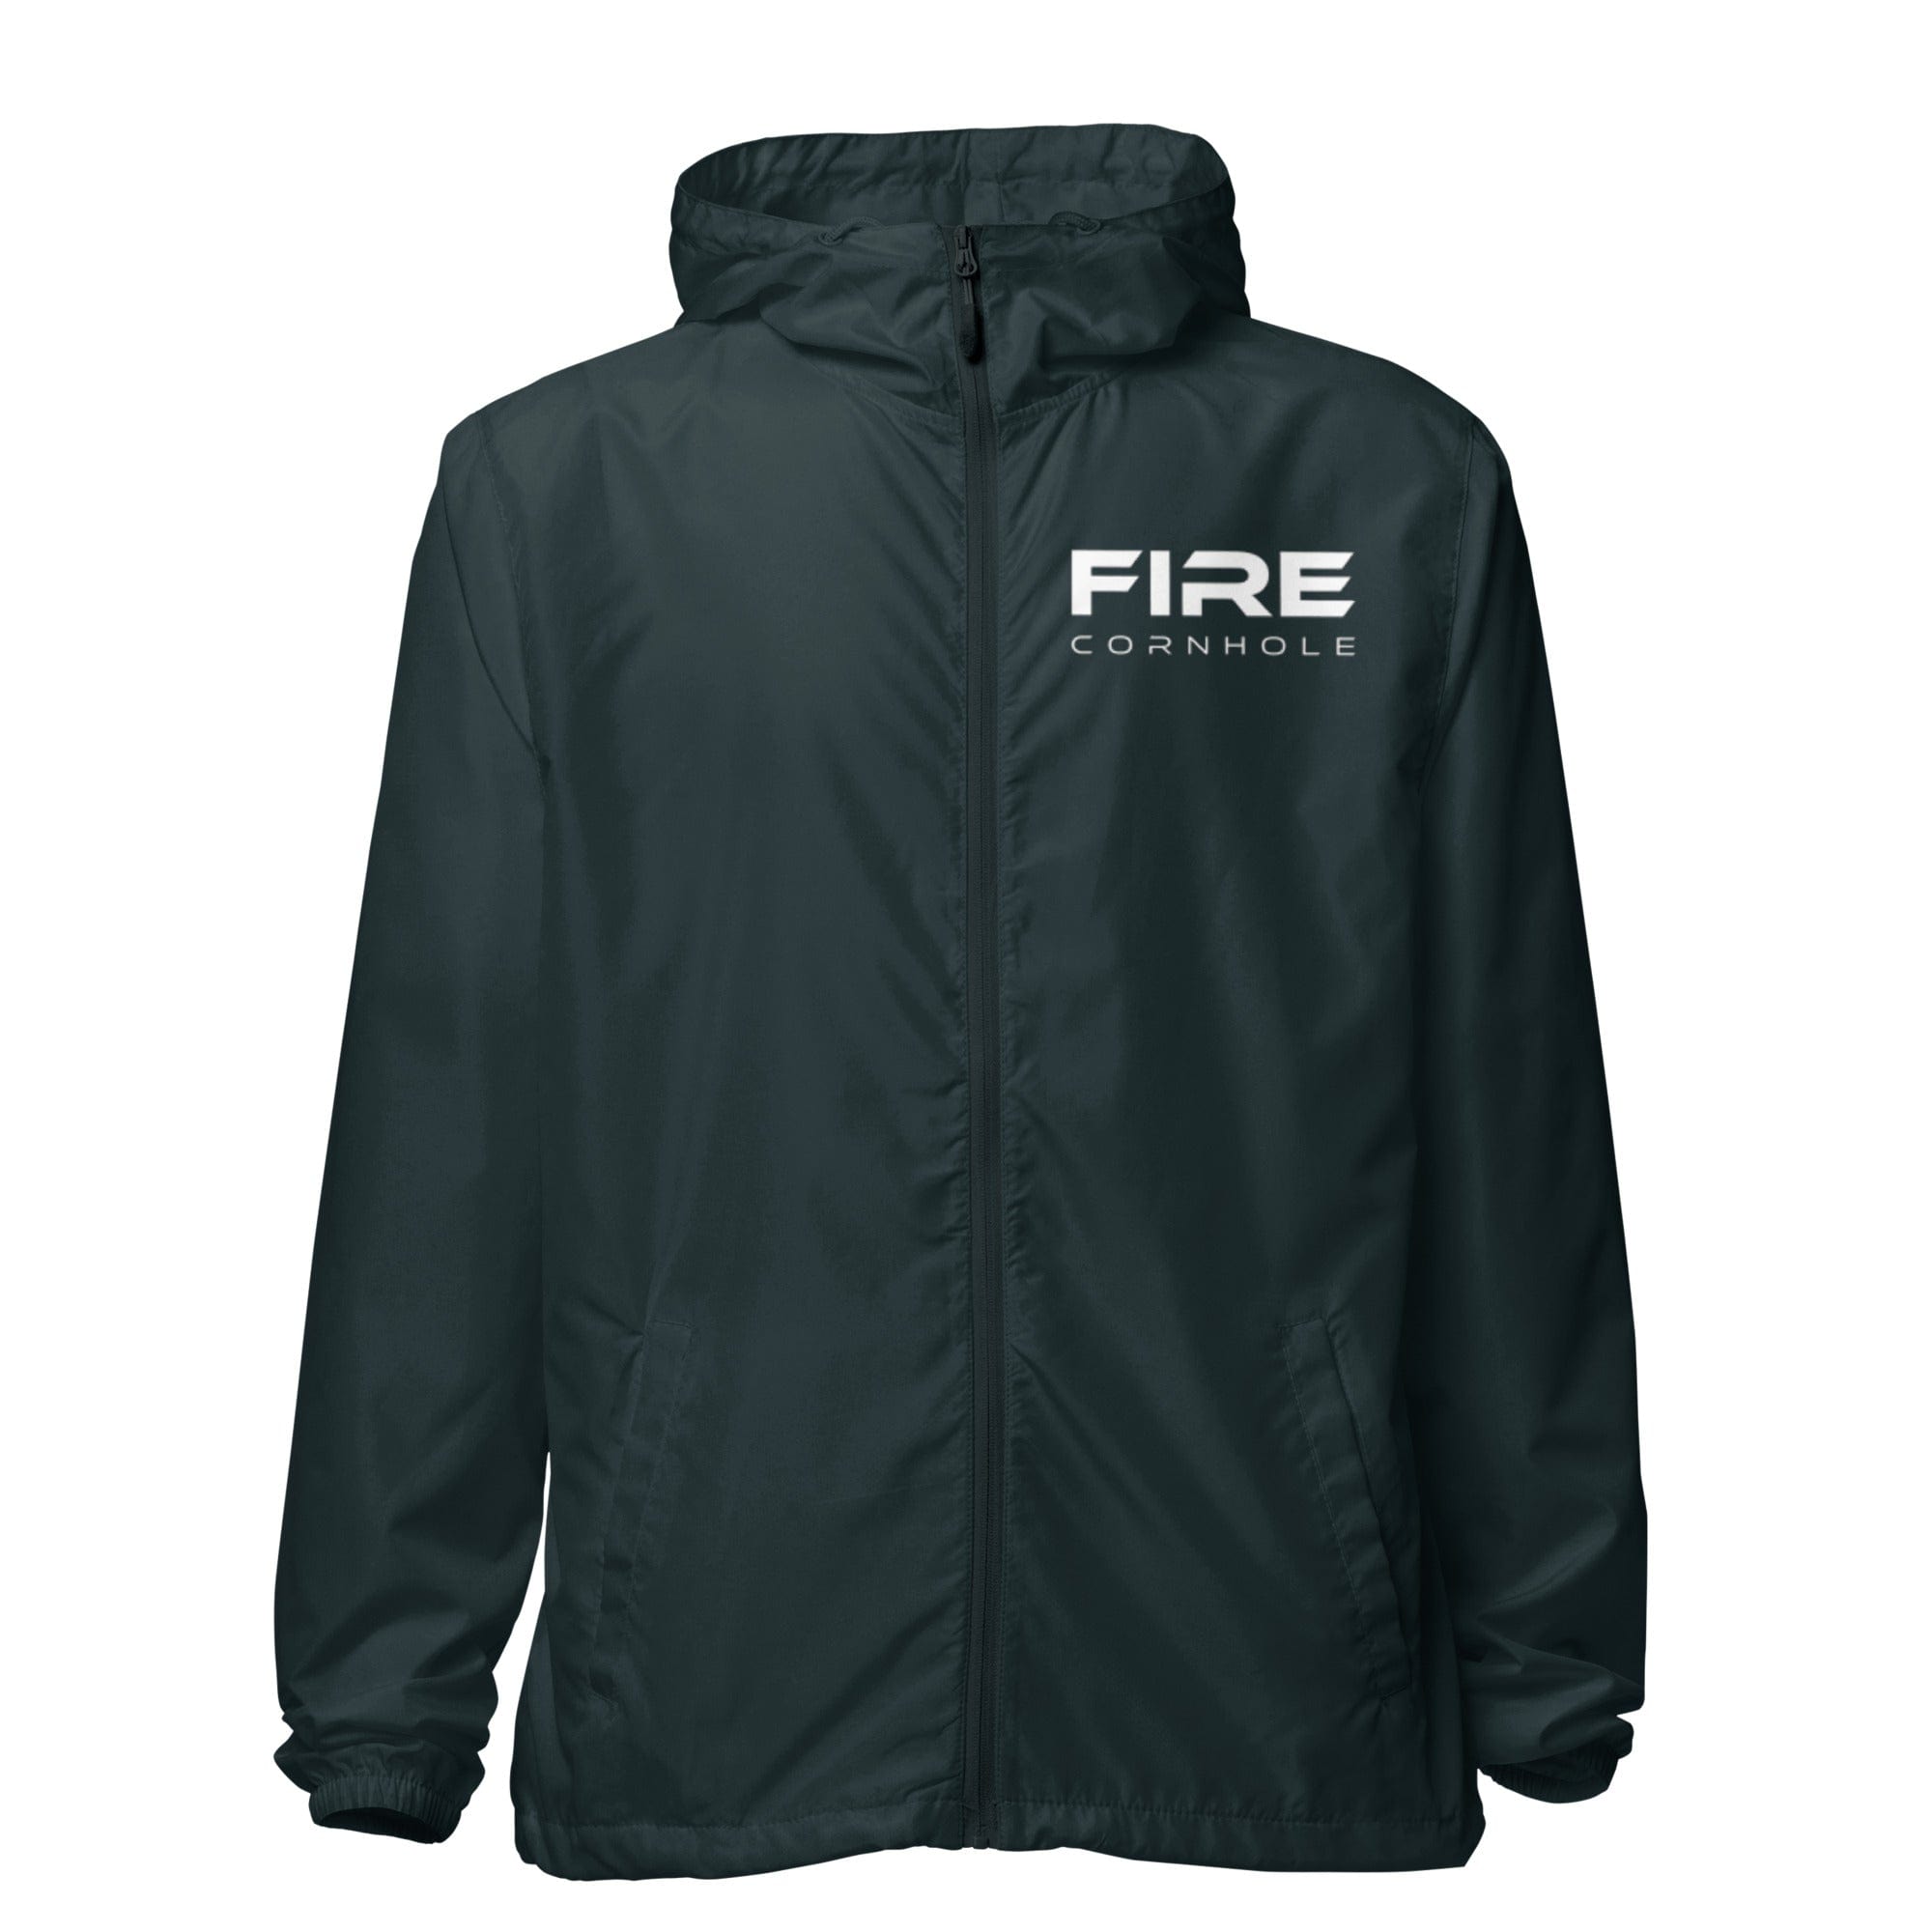 Front view of navy unisex zip-up windbreaker with Fire cornhole logo in white